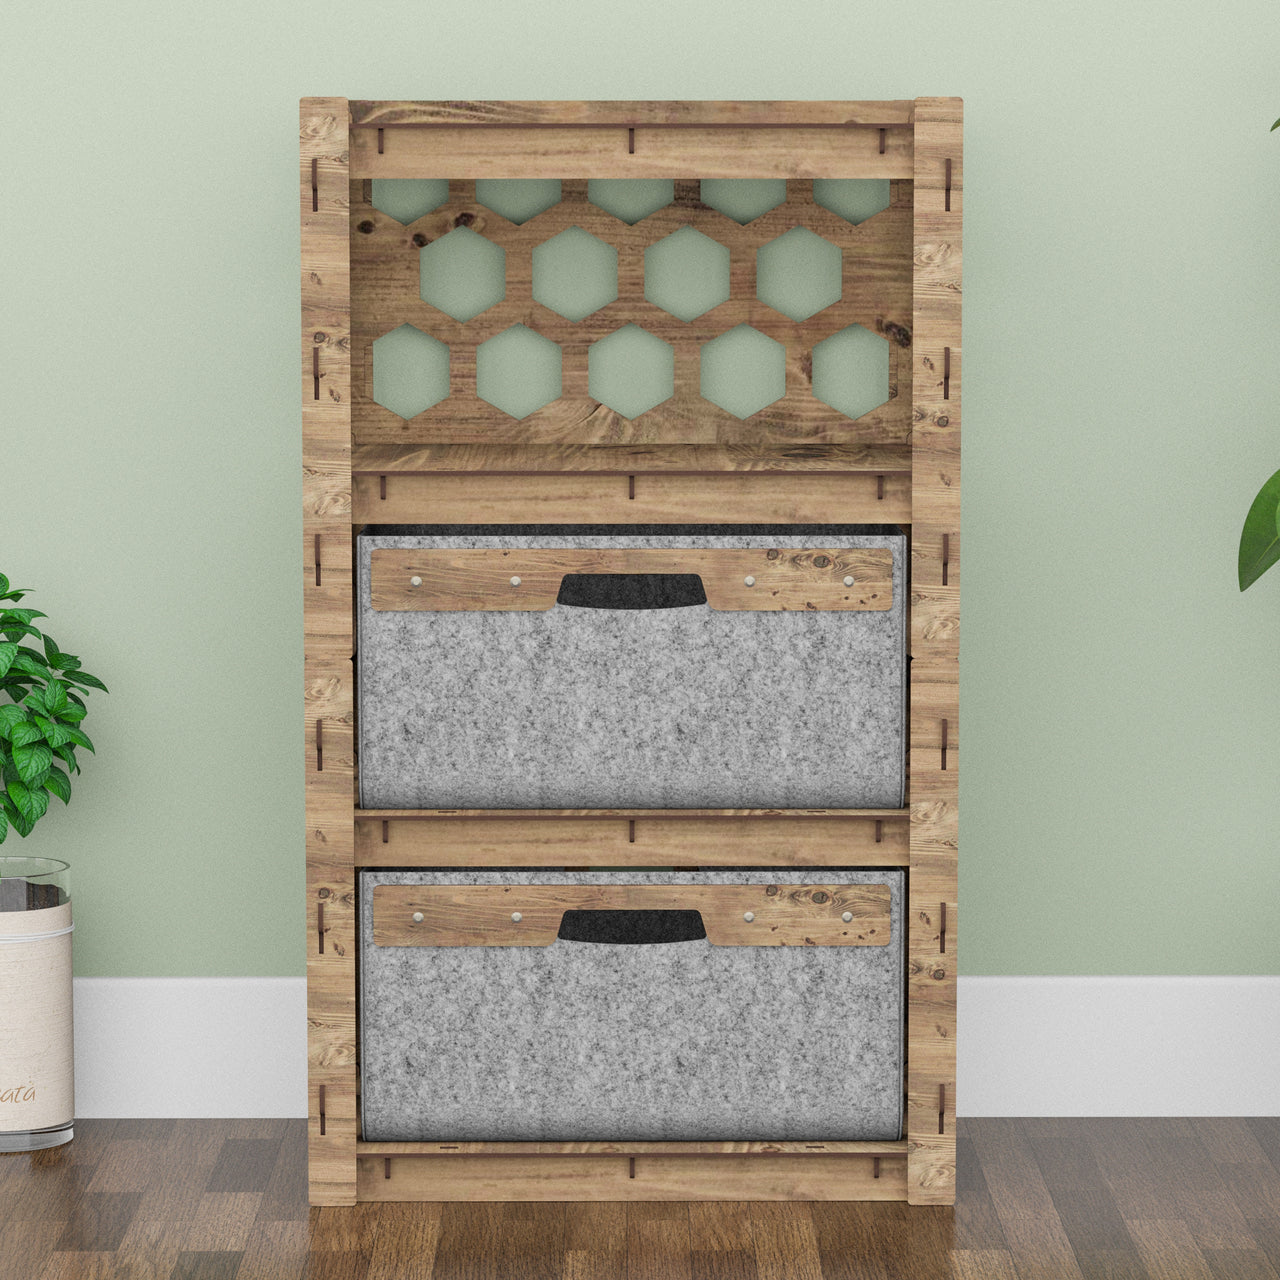 Honeycomb Chest Of 2 Drawers Storage Cabinet [2 LARGE GRAY BINS]